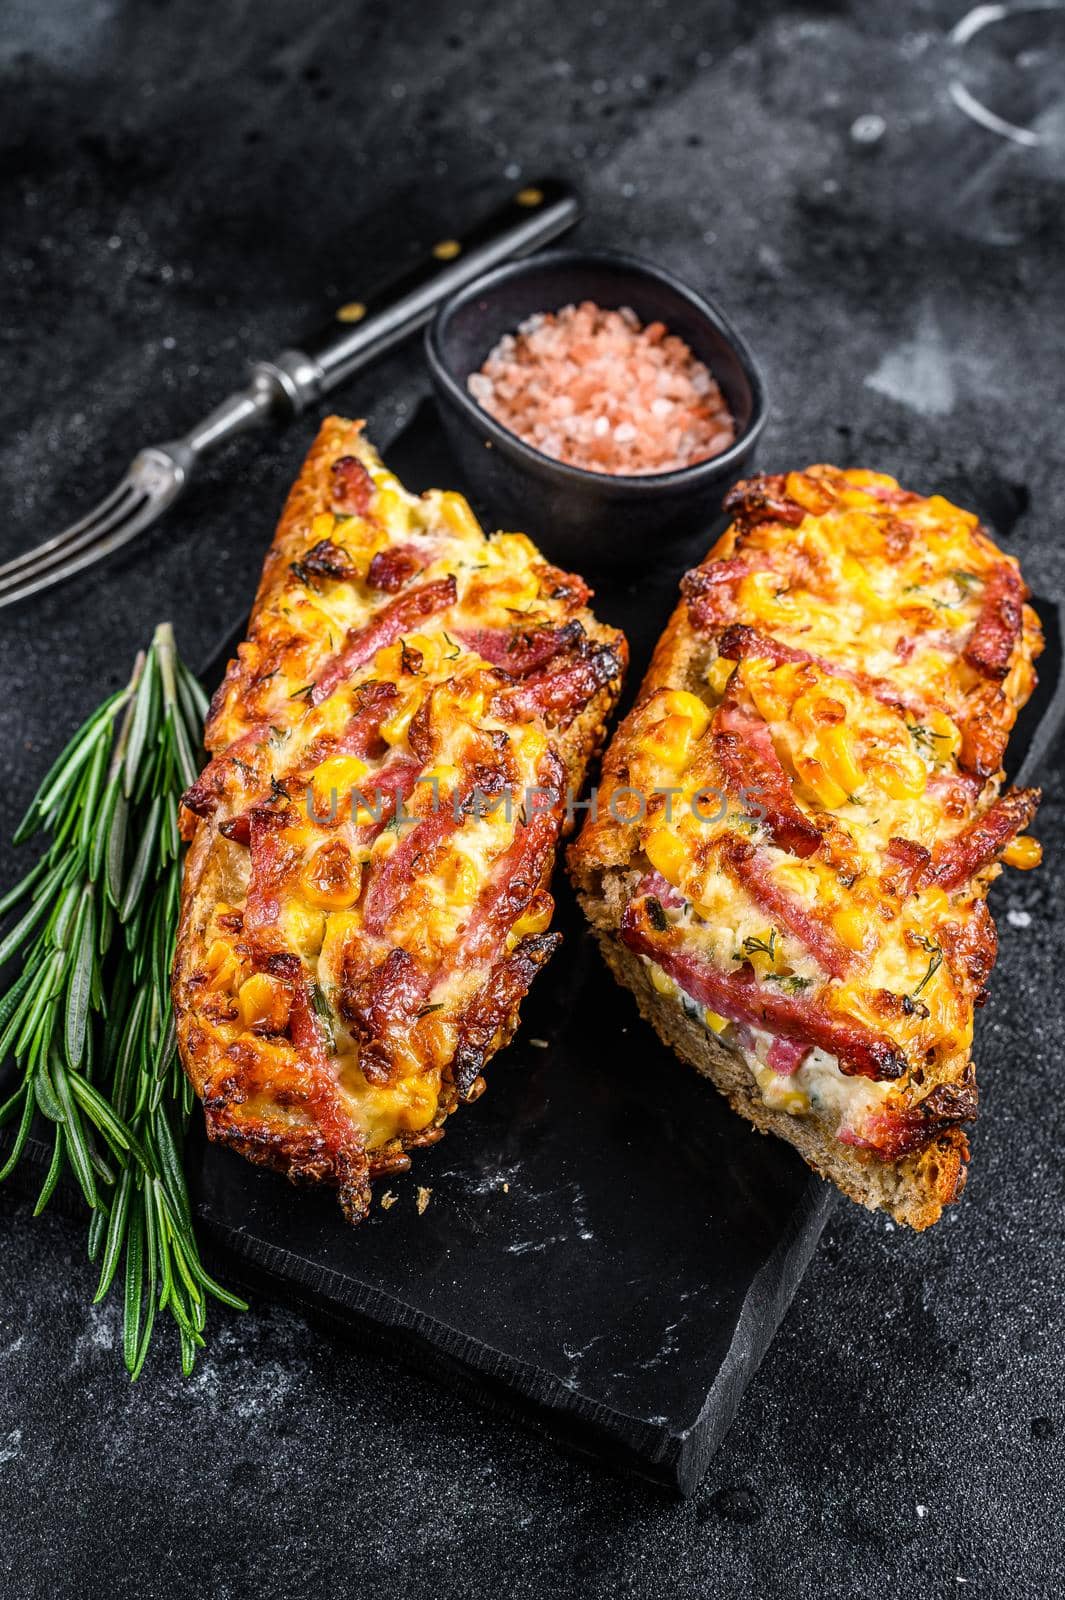 Hot baked open Baguette sandwich with ham, bacon, vegetables and cheese. Black background. Top view by Composter